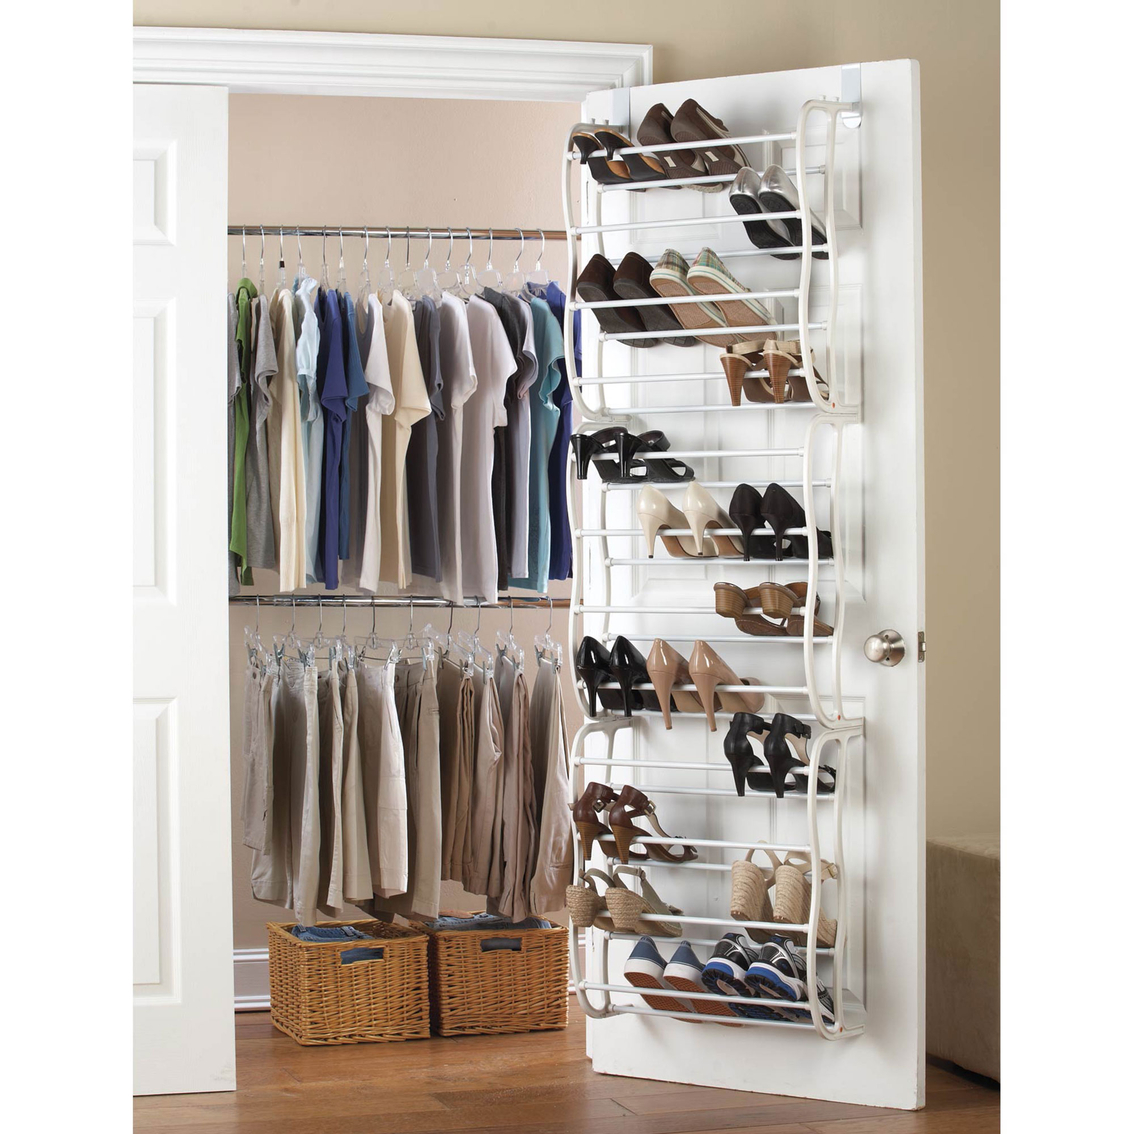 10-hacks-to-make-your-closet-clutter-free7